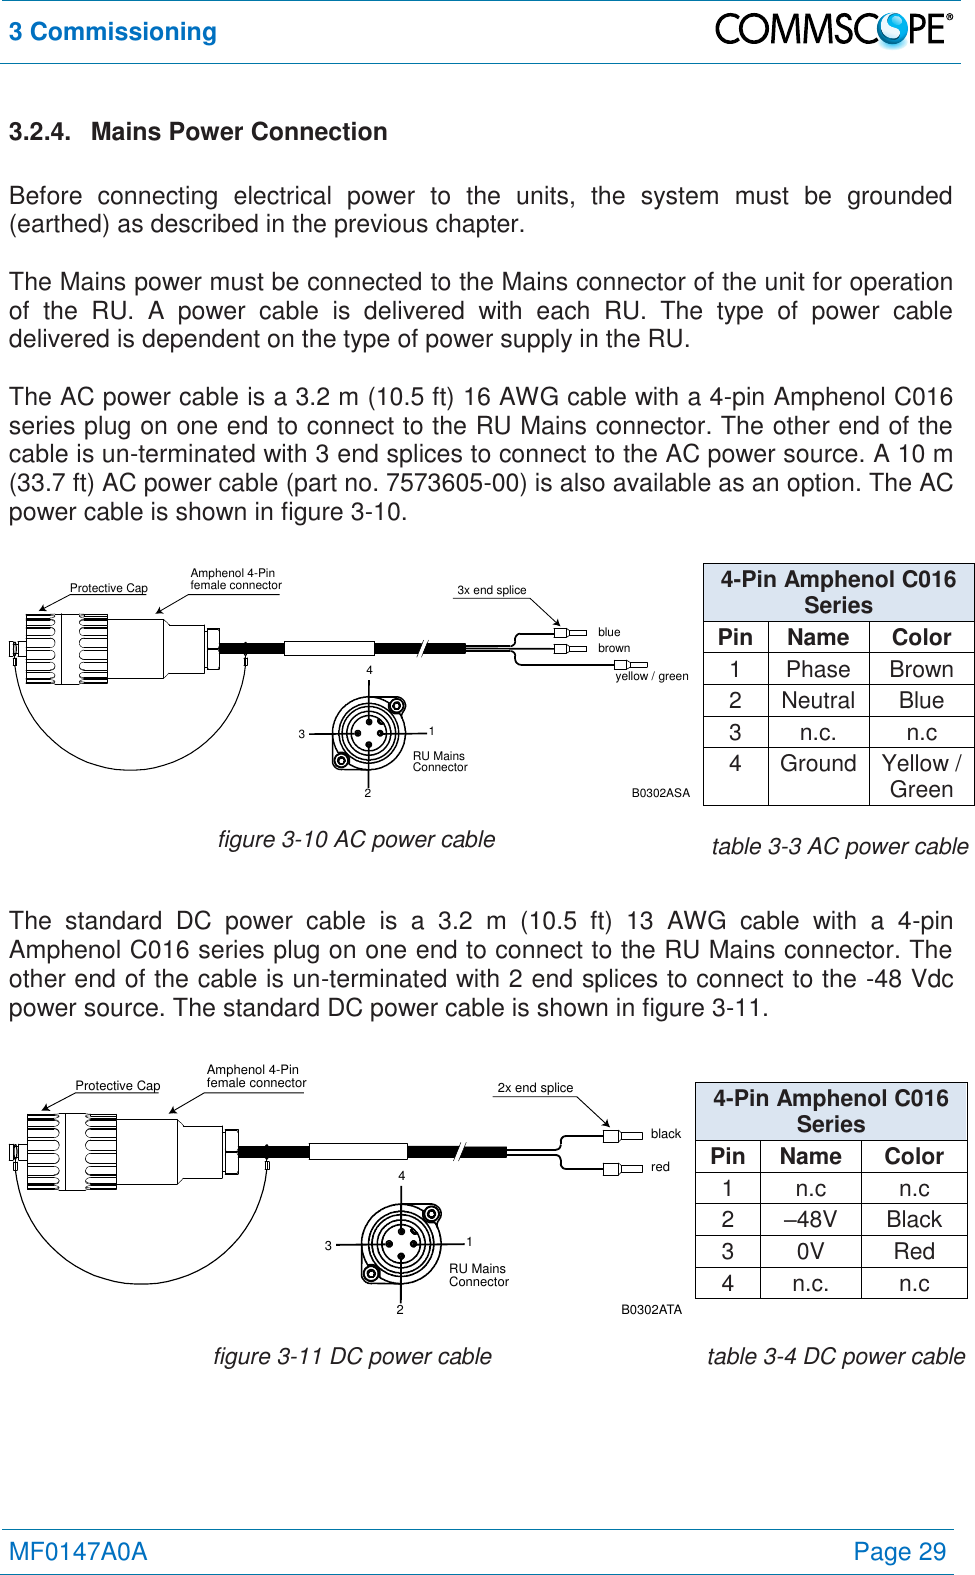 3 Commissioning   MF0147A0A Page 29  3.2.4.   Mains Power Connection  Before  connecting  electrical  power  to  the  units,  the  system  must  be  grounded (earthed) as described in the previous chapter.  The Mains power must be connected to the Mains connector of the unit for operation of  the  RU.  A  power  cable  is  delivered  with  each  RU.  The  type  of  power  cable delivered is dependent on the type of power supply in the RU.  The AC power cable is a 3.2 m (10.5 ft) 16 AWG cable with a 4-pin Amphenol C016 series plug on one end to connect to the RU Mains connector. The other end of the cable is un-terminated with 3 end splices to connect to the AC power source. A 10 m (33.7 ft) AC power cable (part no. 7573605-00) is also available as an option. The AC power cable is shown in figure 3-10.  blueAmphenol 4-Pinfemale connectorProtective Cap 3x end splicebrownyellow / greenB0302ASARU MainsConnector4321 4-Pin Amphenol C016 Series Pin Name Color 1 Phase Brown 2 Neutral Blue 3 n.c. n.c 4 Ground Yellow / Green  figure 3-10 AC power cable table 3-3 AC power cable  The  standard  DC  power  cable  is  a  3.2  m  (10.5  ft)  13  AWG  cable  with  a  4-pin Amphenol C016 series plug on one end to connect to the RU Mains connector. The other end of the cable is un-terminated with 2 end splices to connect to the -48 Vdc power source. The standard DC power cable is shown in figure 3-11.  blackAmphenol 4-Pinfemale connectorProtective Cap 2x end spliceredB0302ATARU MainsConnector4321 4-Pin Amphenol C016 Series Pin Name Color 1 n.c n.c 2 –48V Black 3 0V Red 4 n.c. n.c  figure 3-11 DC power cable table 3-4 DC power cable   